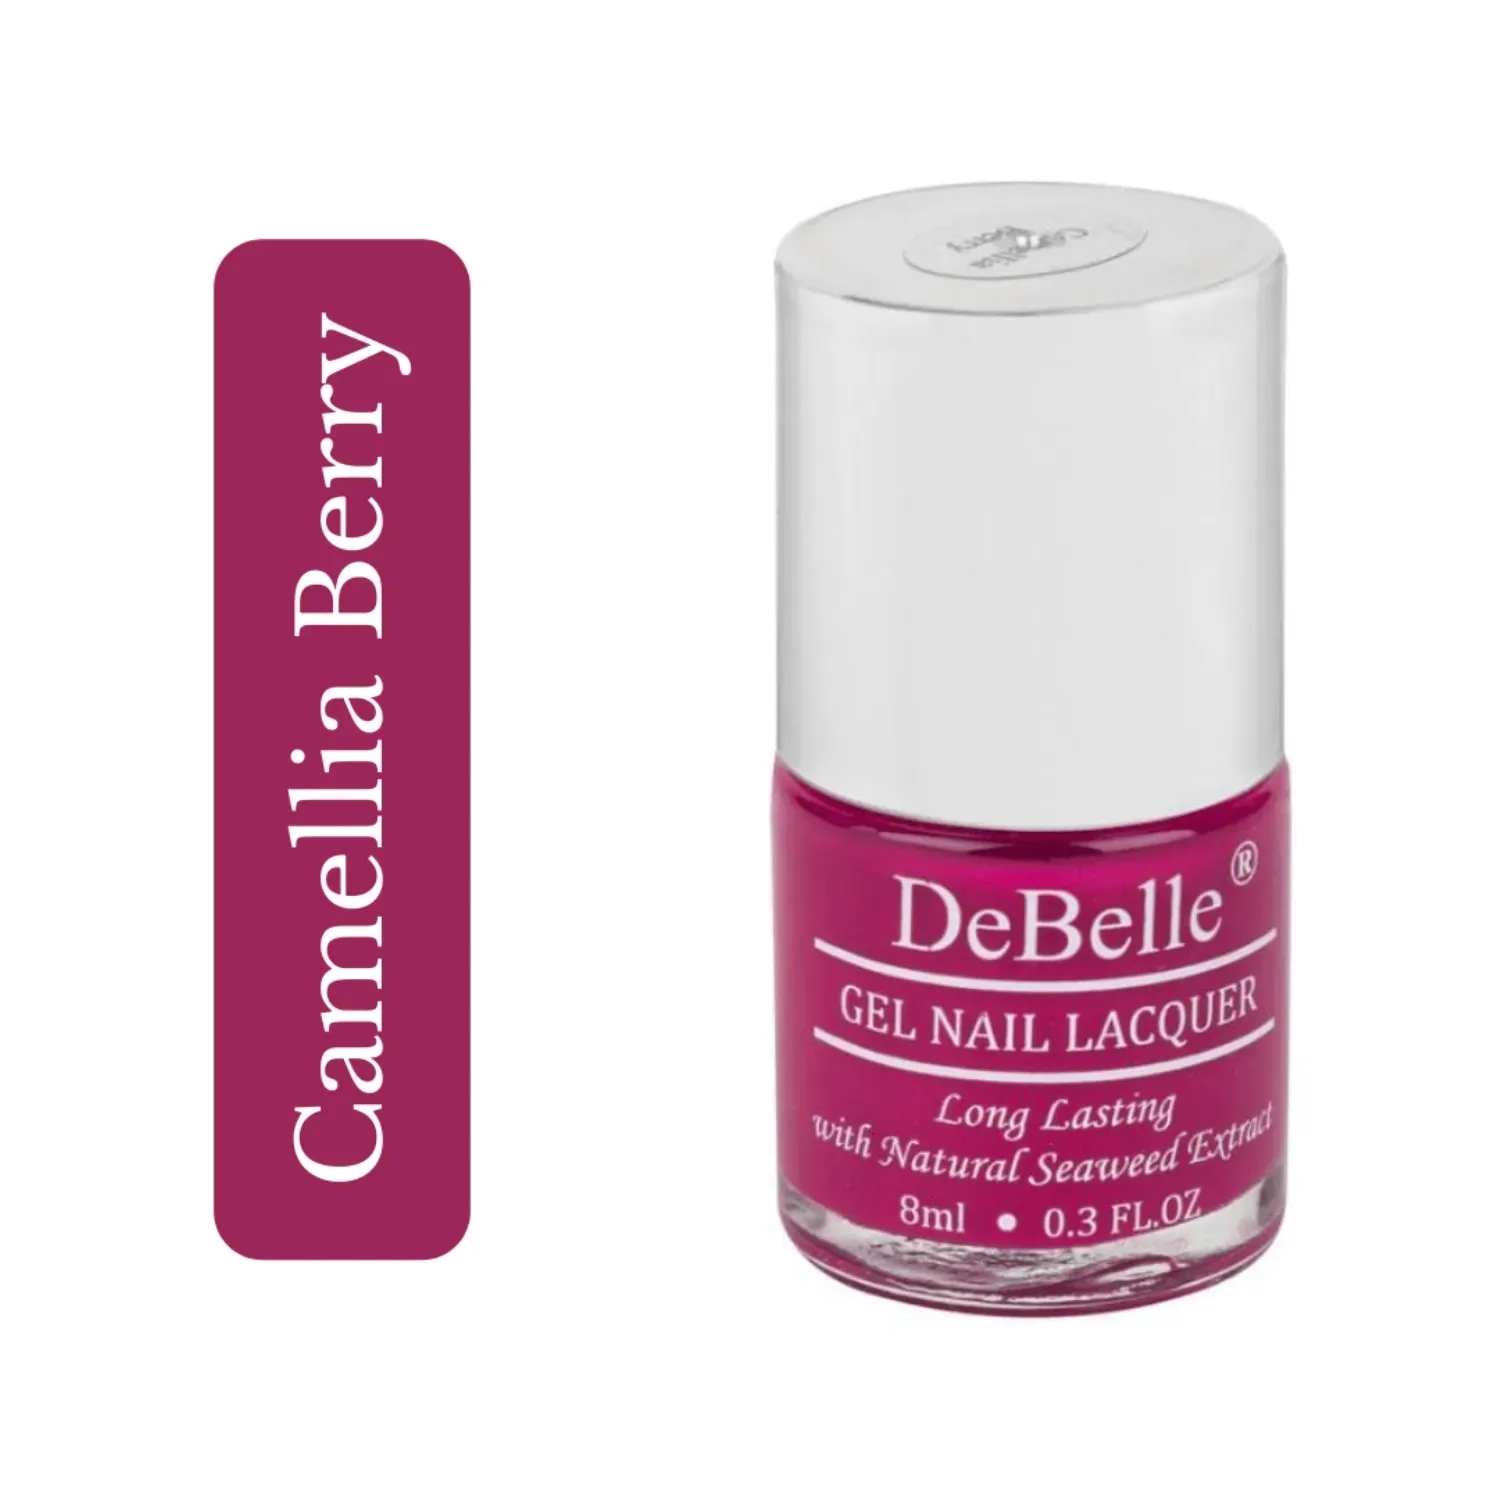 DeBelle Gel Nail Lacquer Review (Mystique Green & Princess Belle) –  Creative Creations by Narjis